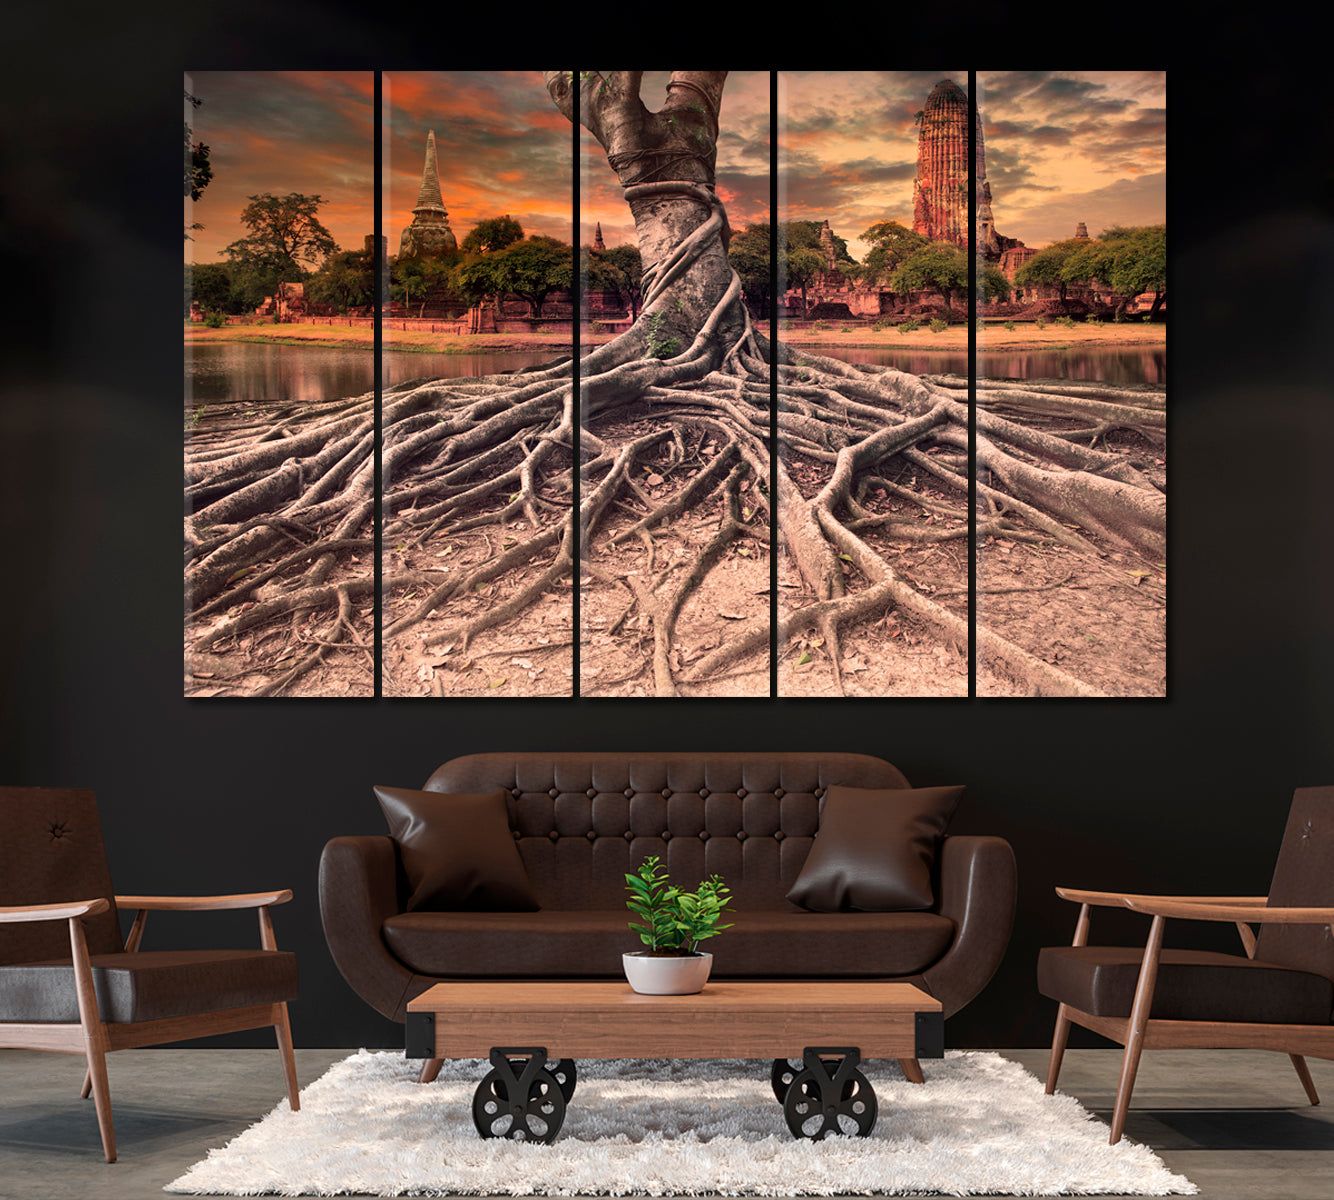 Root of Banyan Tree and Temple of Ayutthaya Canvas Print ArtLexy 5 Panels 36"x24" inches 